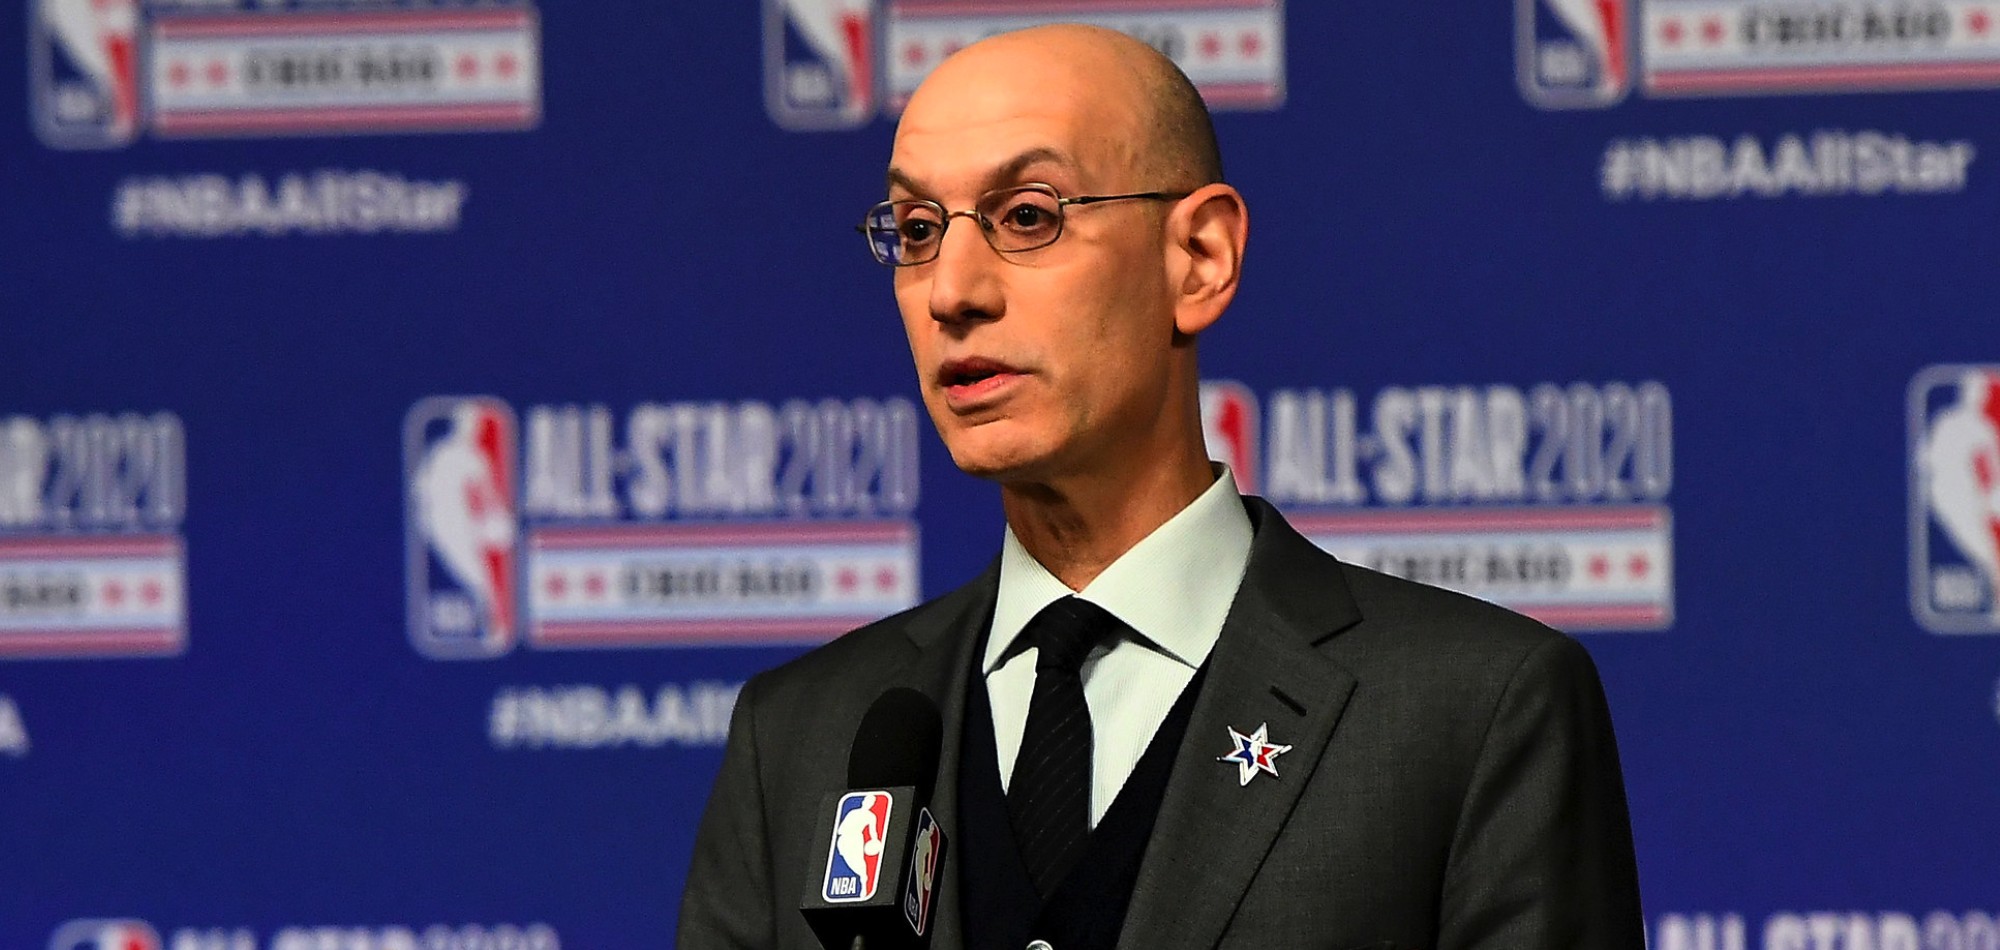 The NBA will address player concerns before return, says commissioner Silver